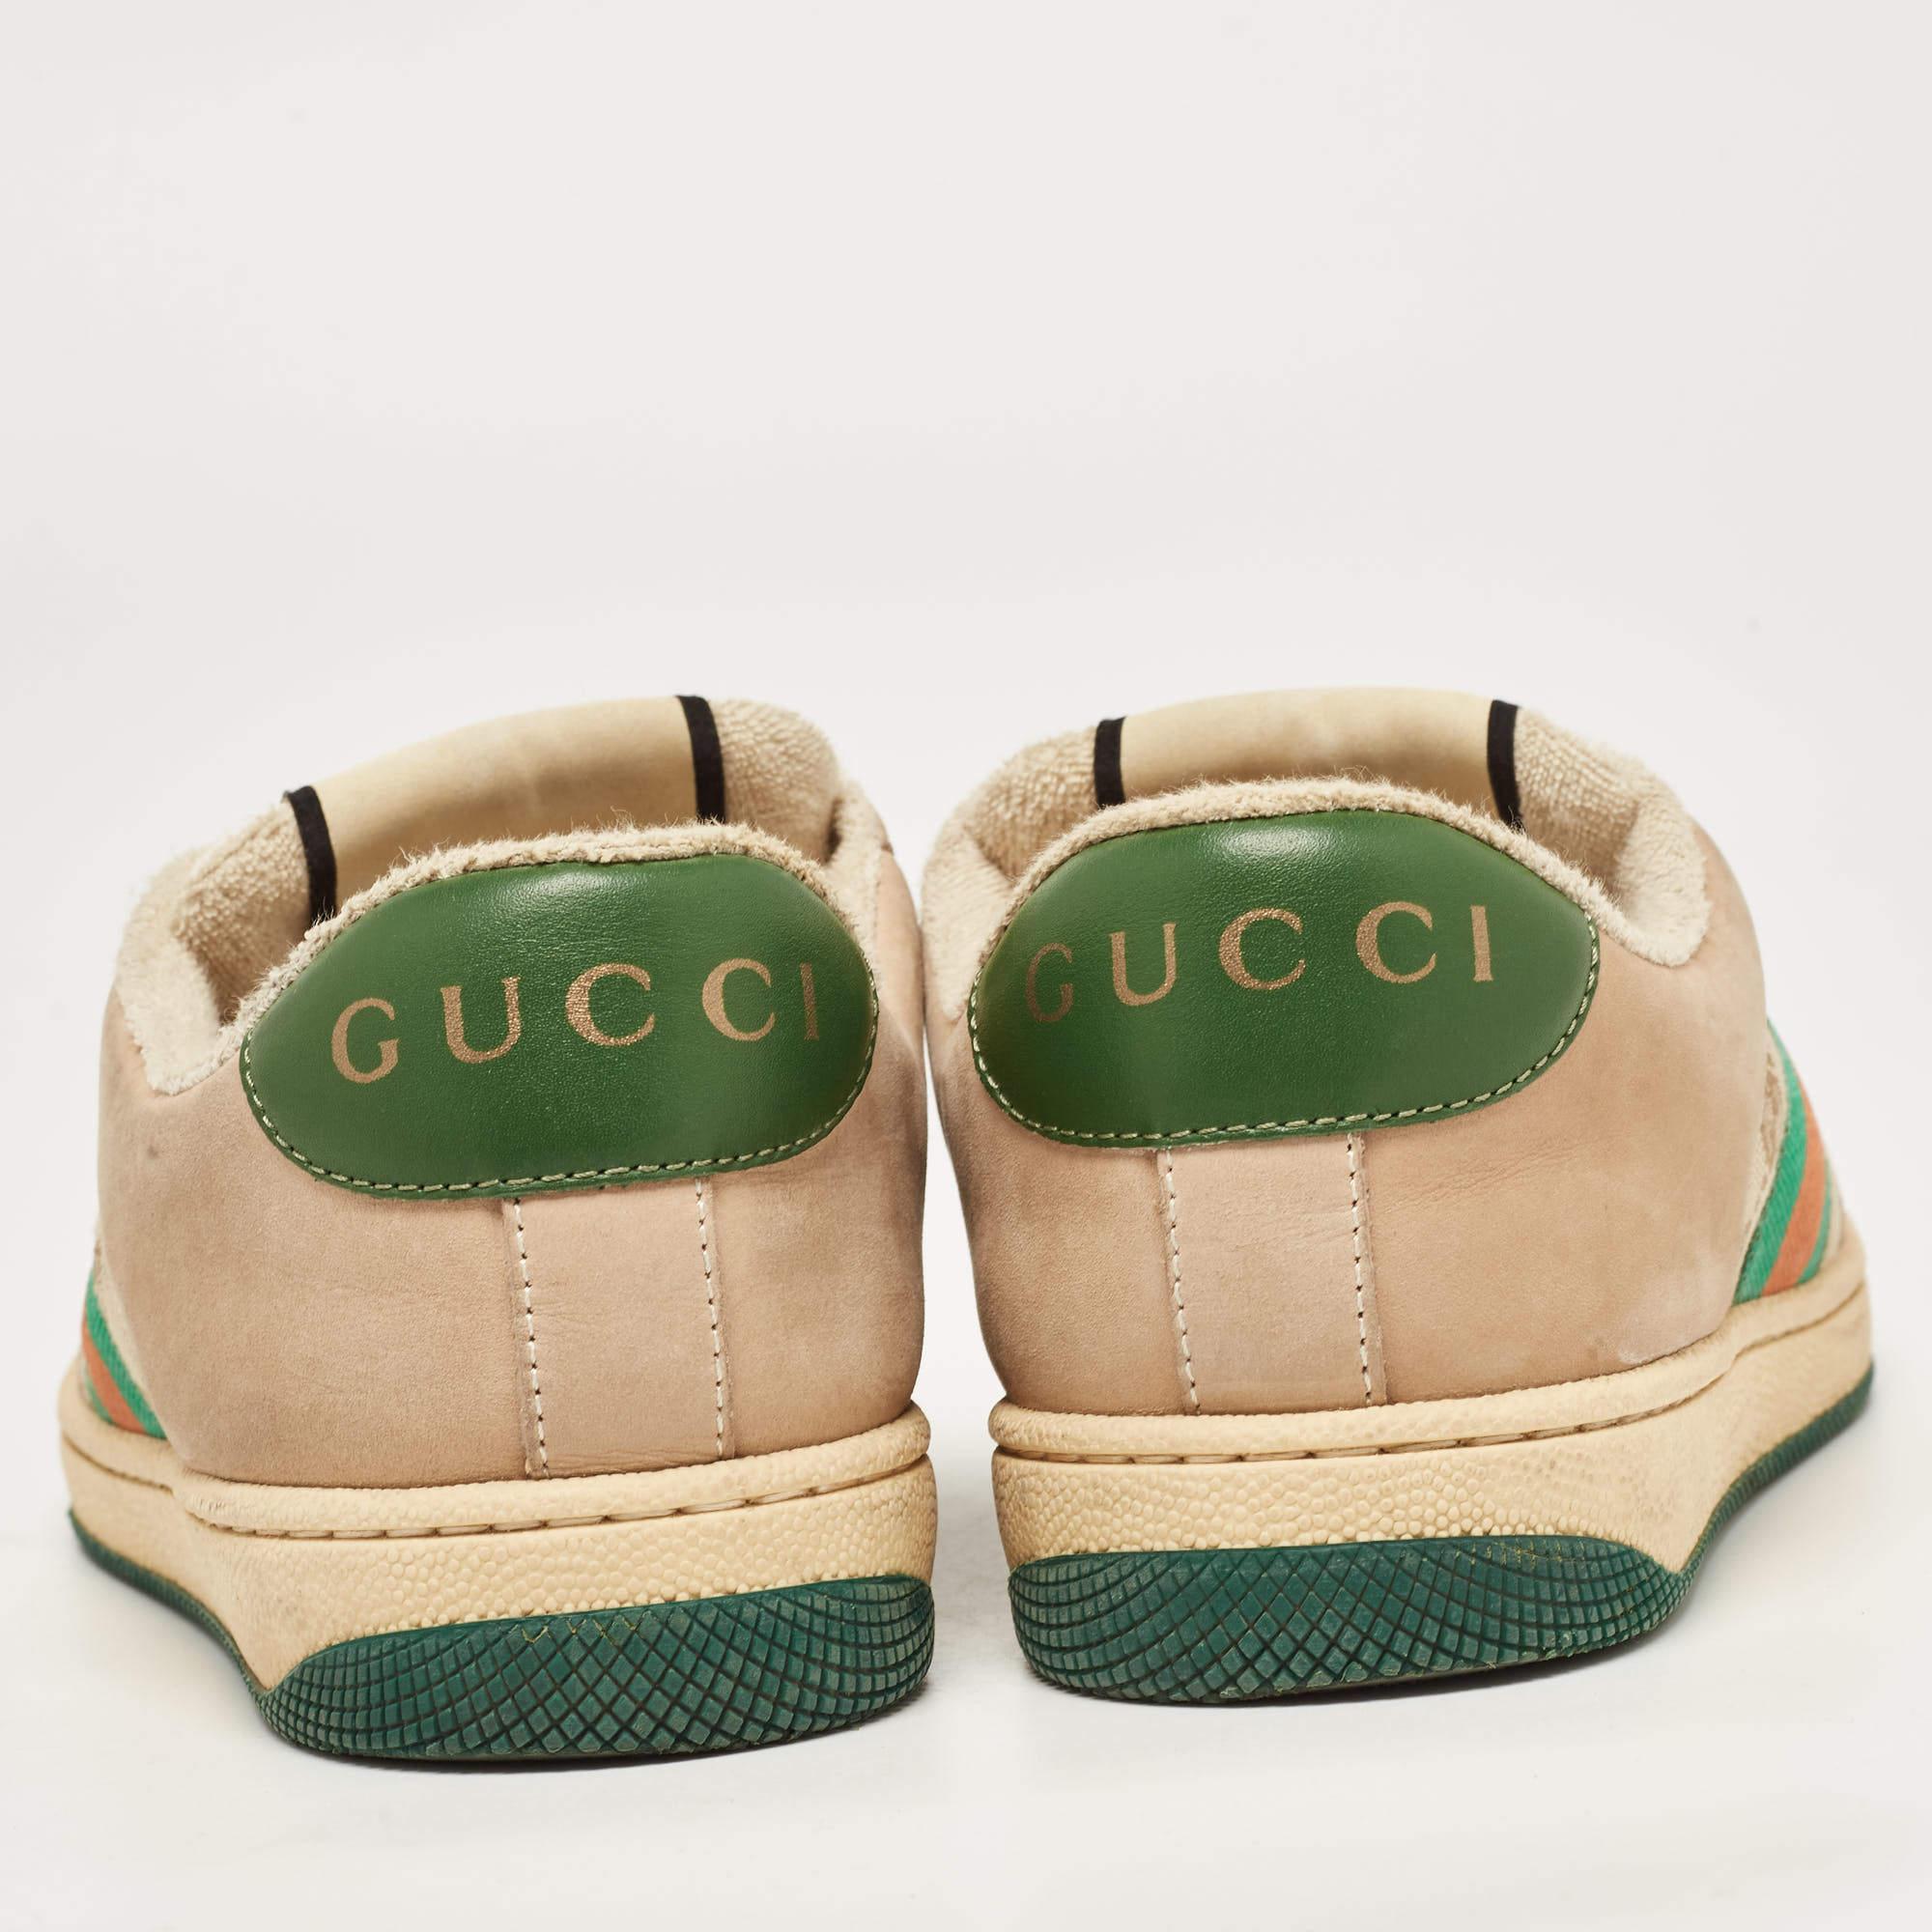 Gucci Multicolor Nubuck and Leather Screener Sneakers Size 37 1